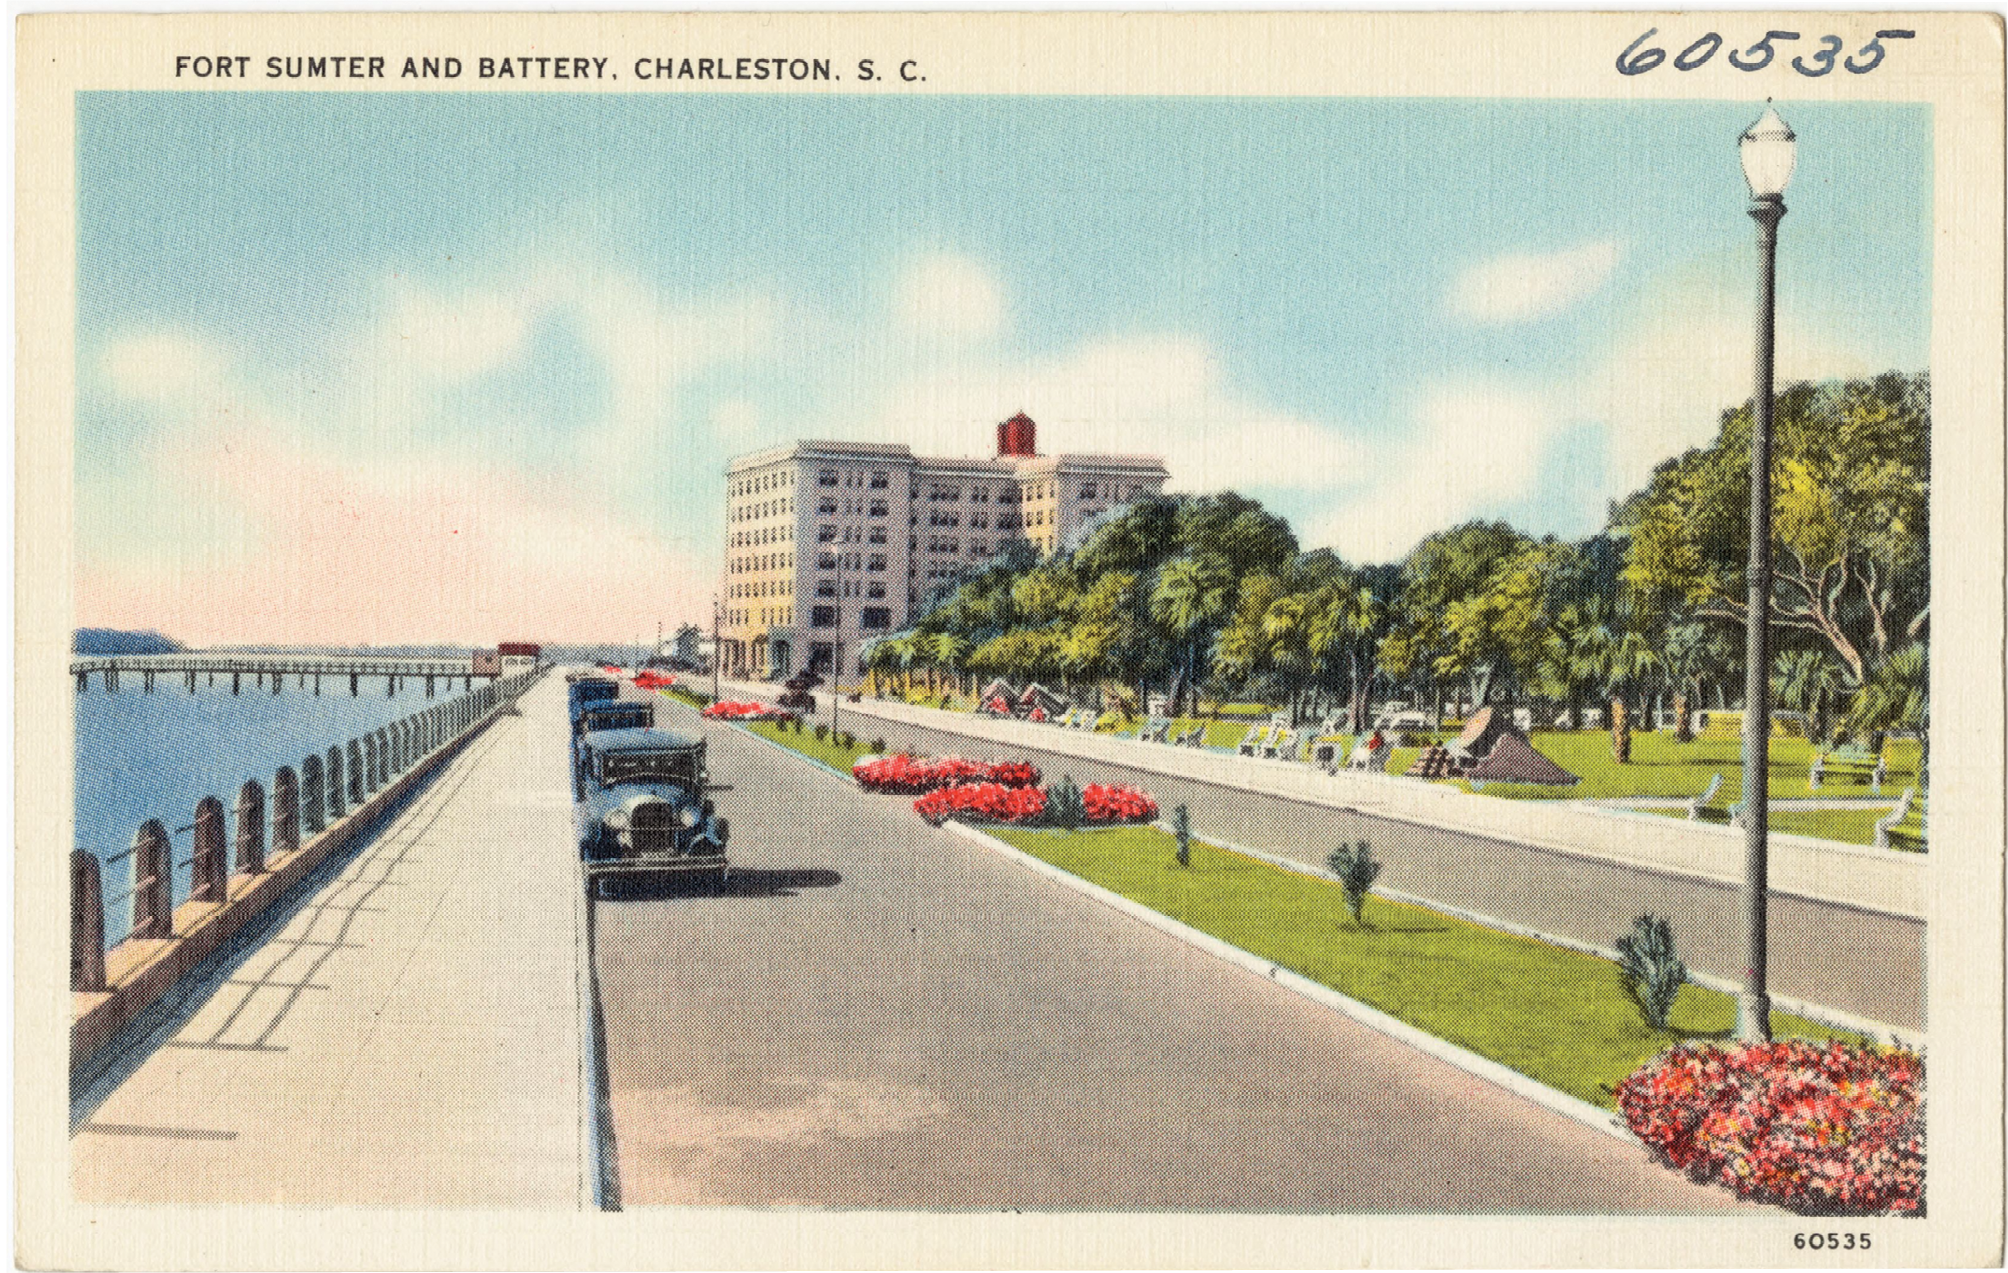 Fort Sumter &amp; Battery: “This hotel on the famous Battery was named after historic Fort Sumter, located on a tiny island in Charleston Harbor, easily visible from the waterfront rooms of the Fort Sumter Hotel.”